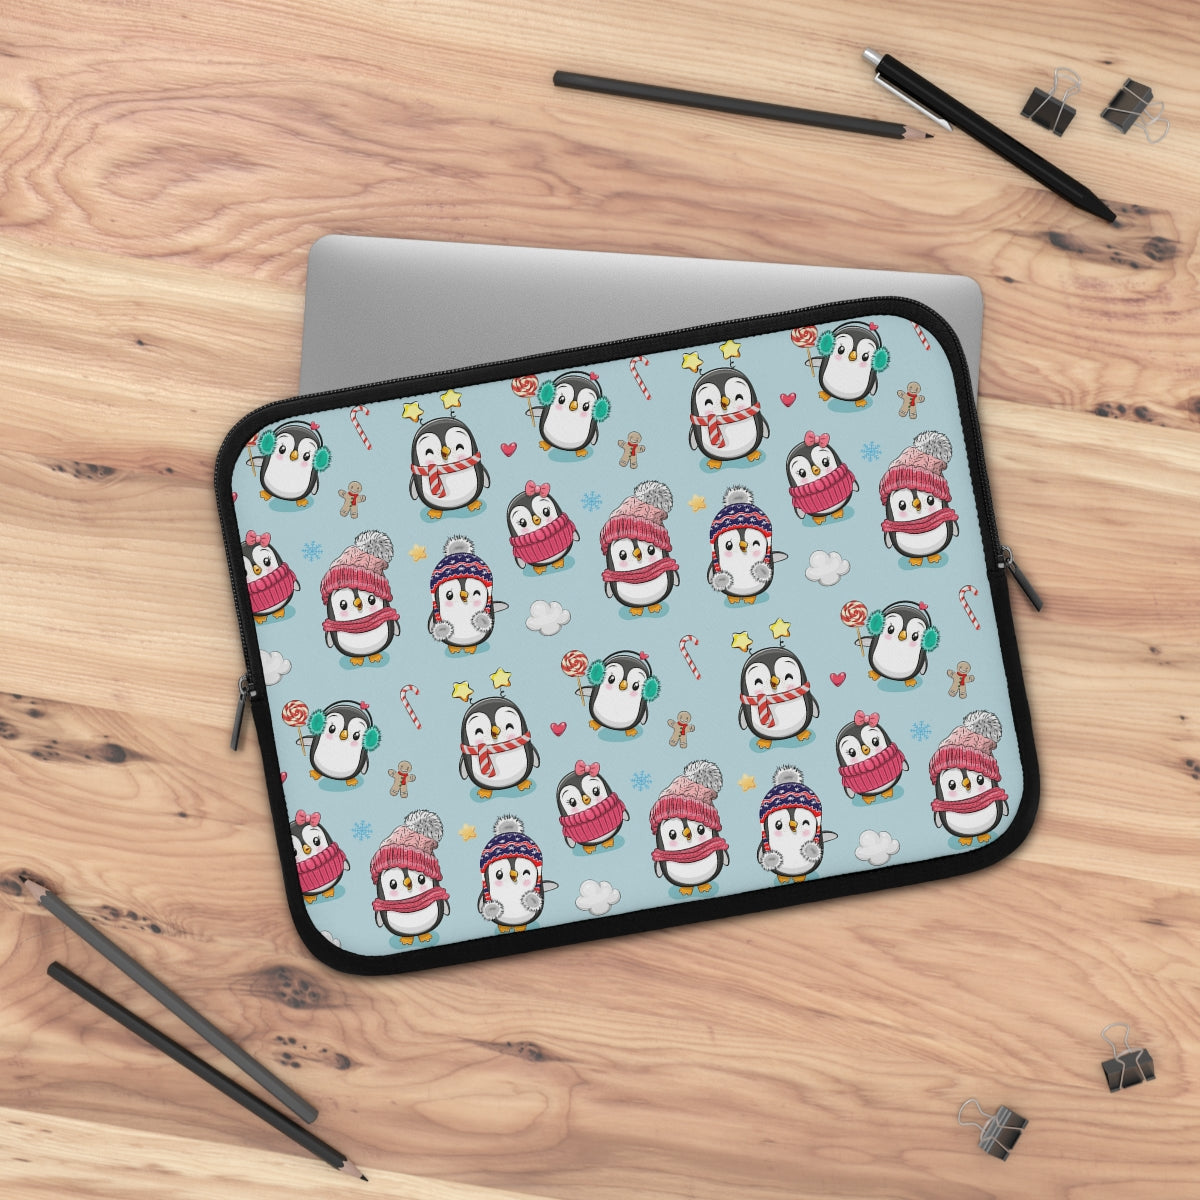 Penguins in Winter Clothes Laptop Sleeve